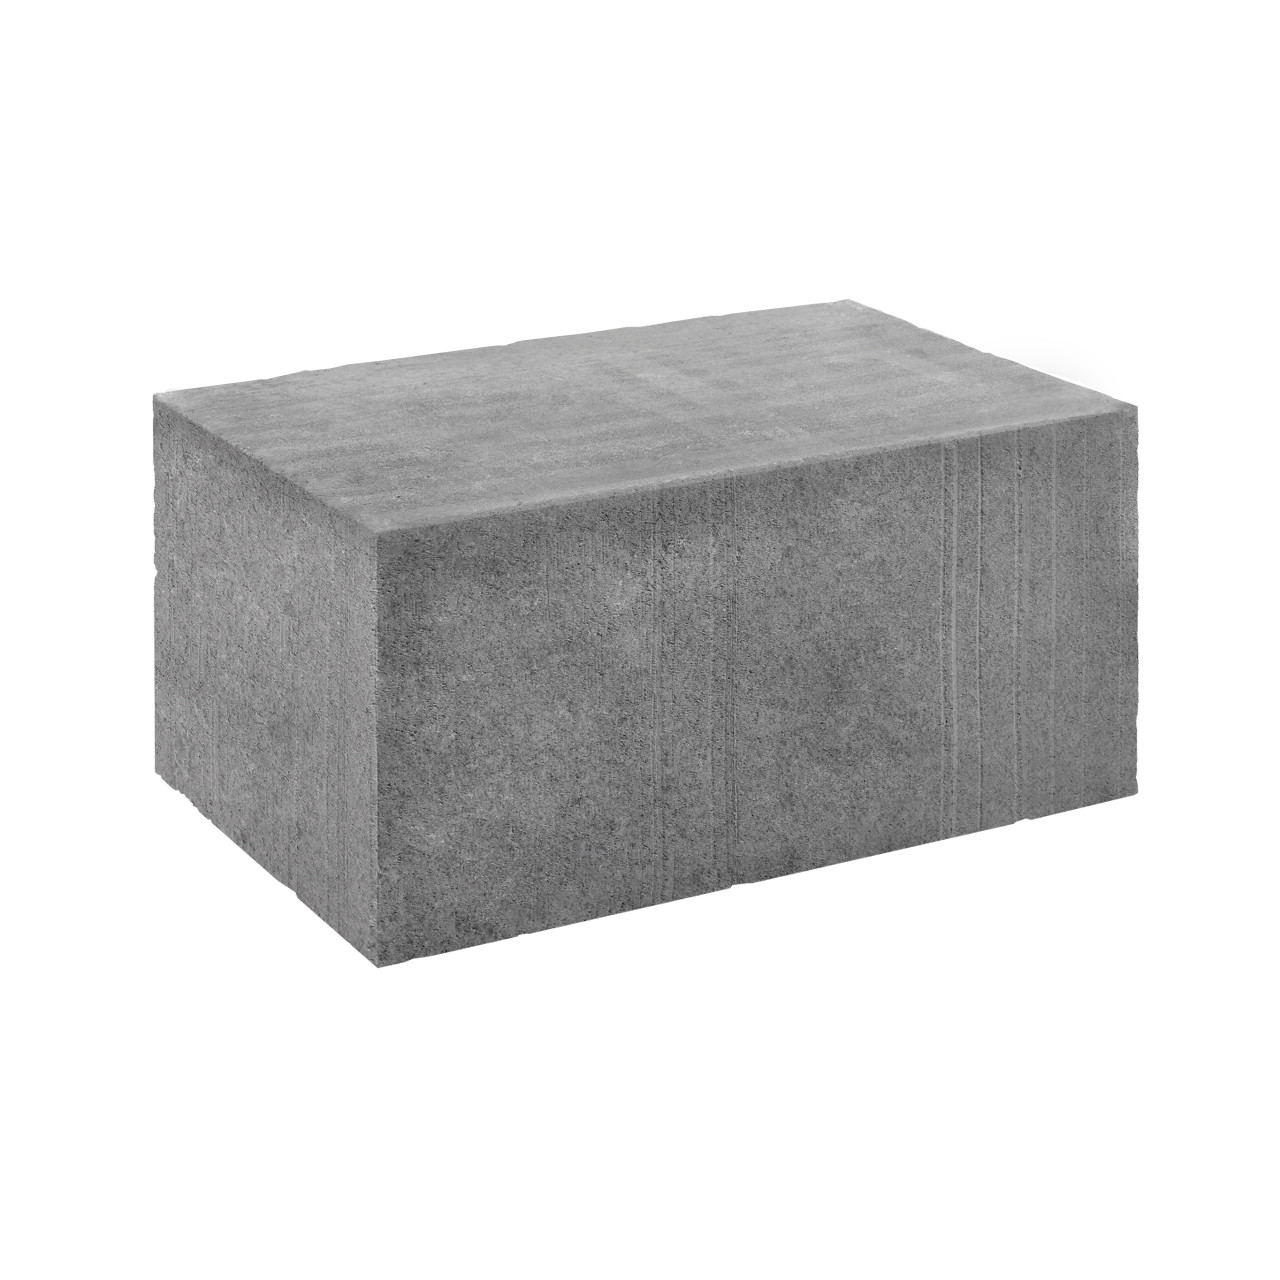 Photograph of Celcon Block Standard Foundation 440 X 215 X 300mm